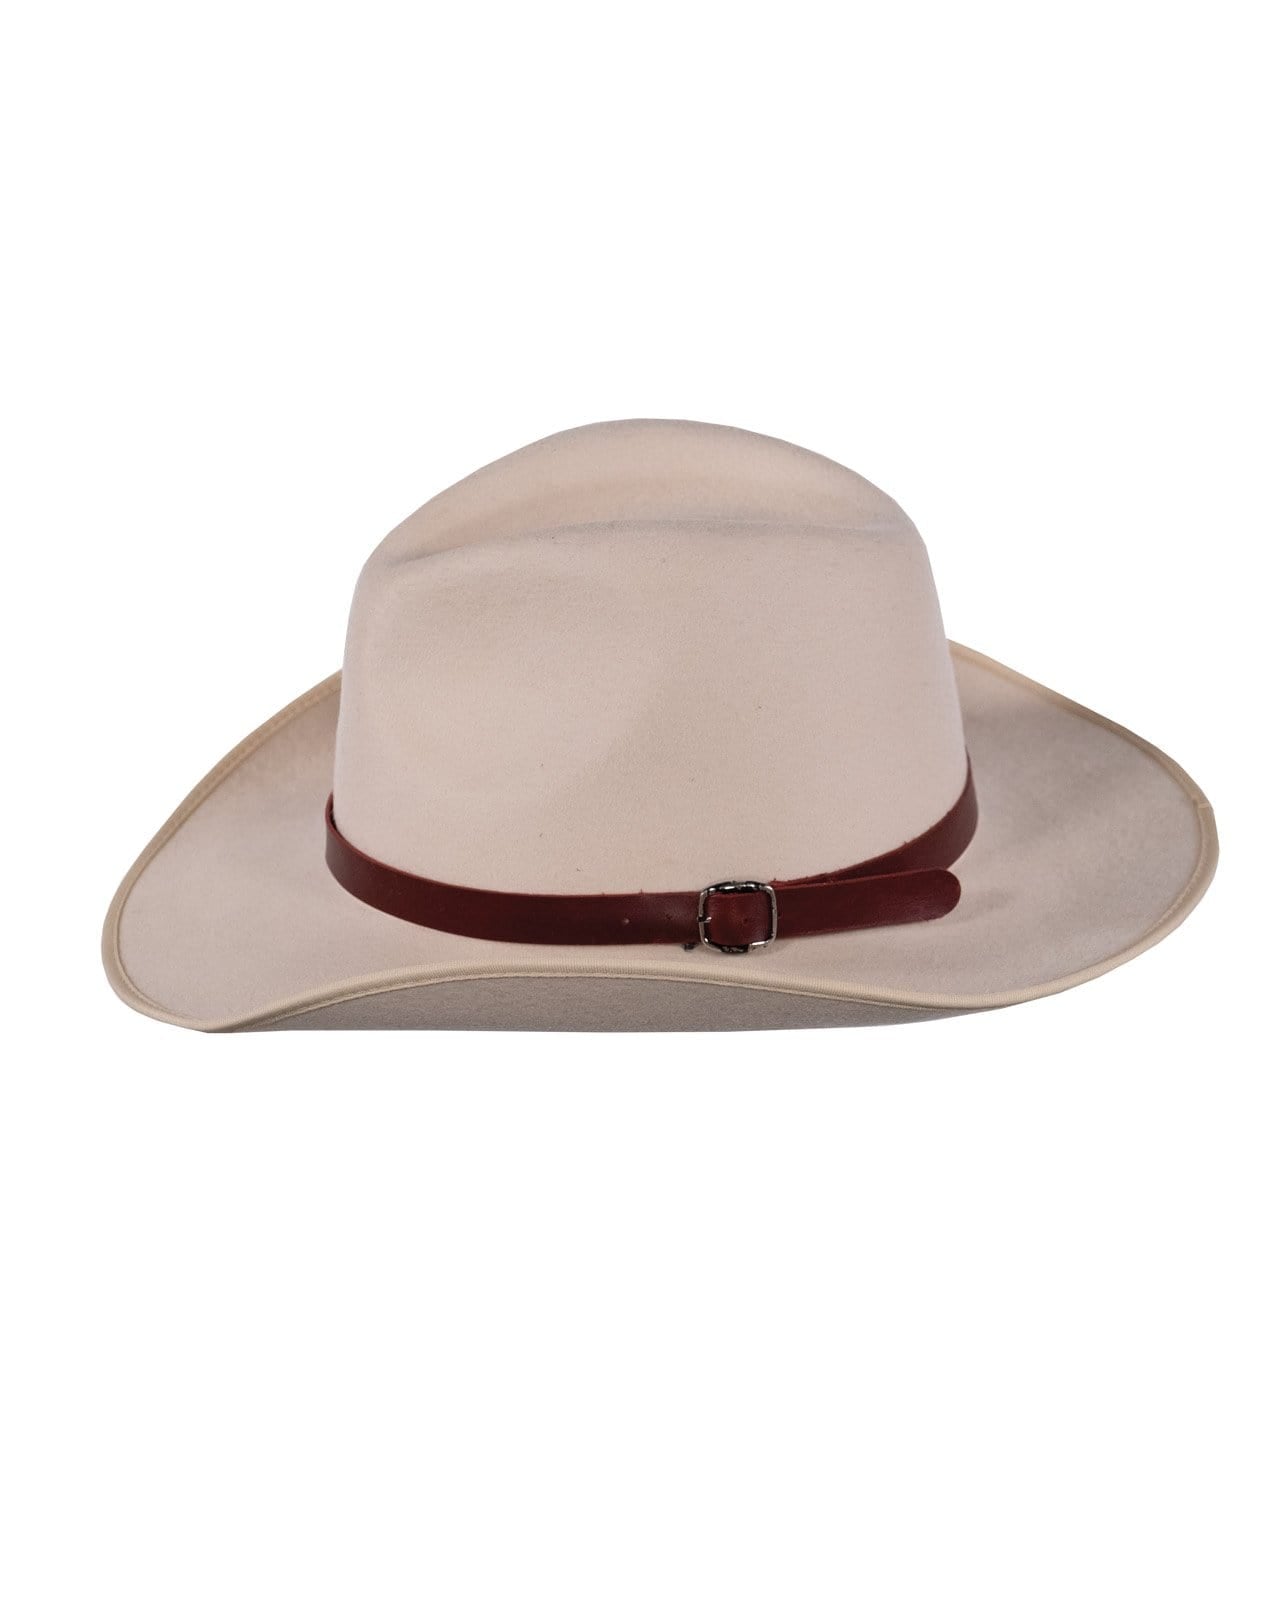 Outback Trading Outback Gallop - Wool Outback Hat - OB-1107-Bone-7 1/8